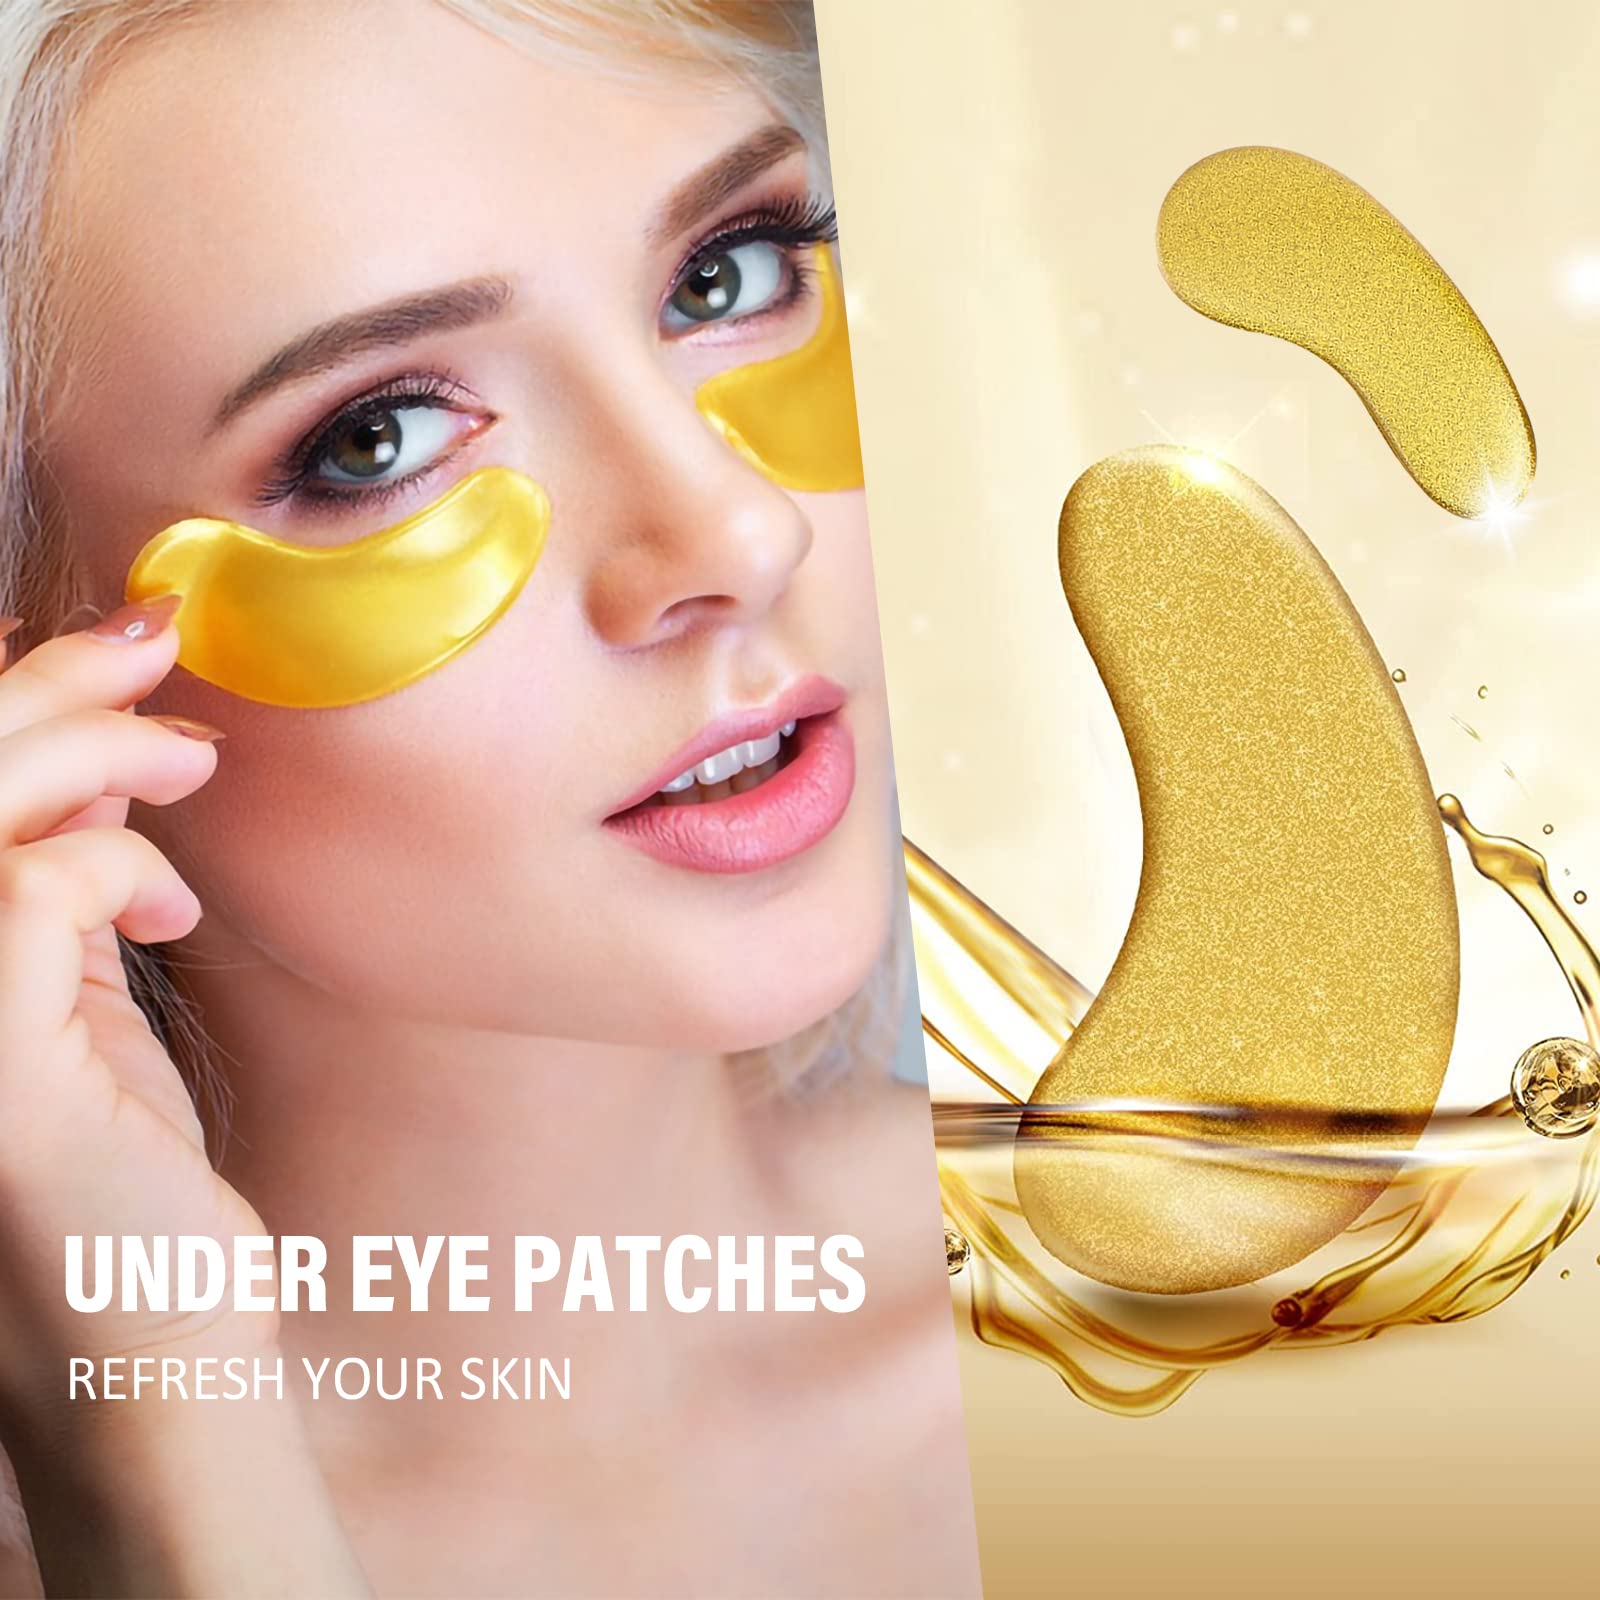 Xhoon 24K Gold Under Eye Patches - 20 Pairs Amino Acid & Collagen, Under Eye Mask for Face Care, Dark Circles and Puffiness, Beauty & Personal Care